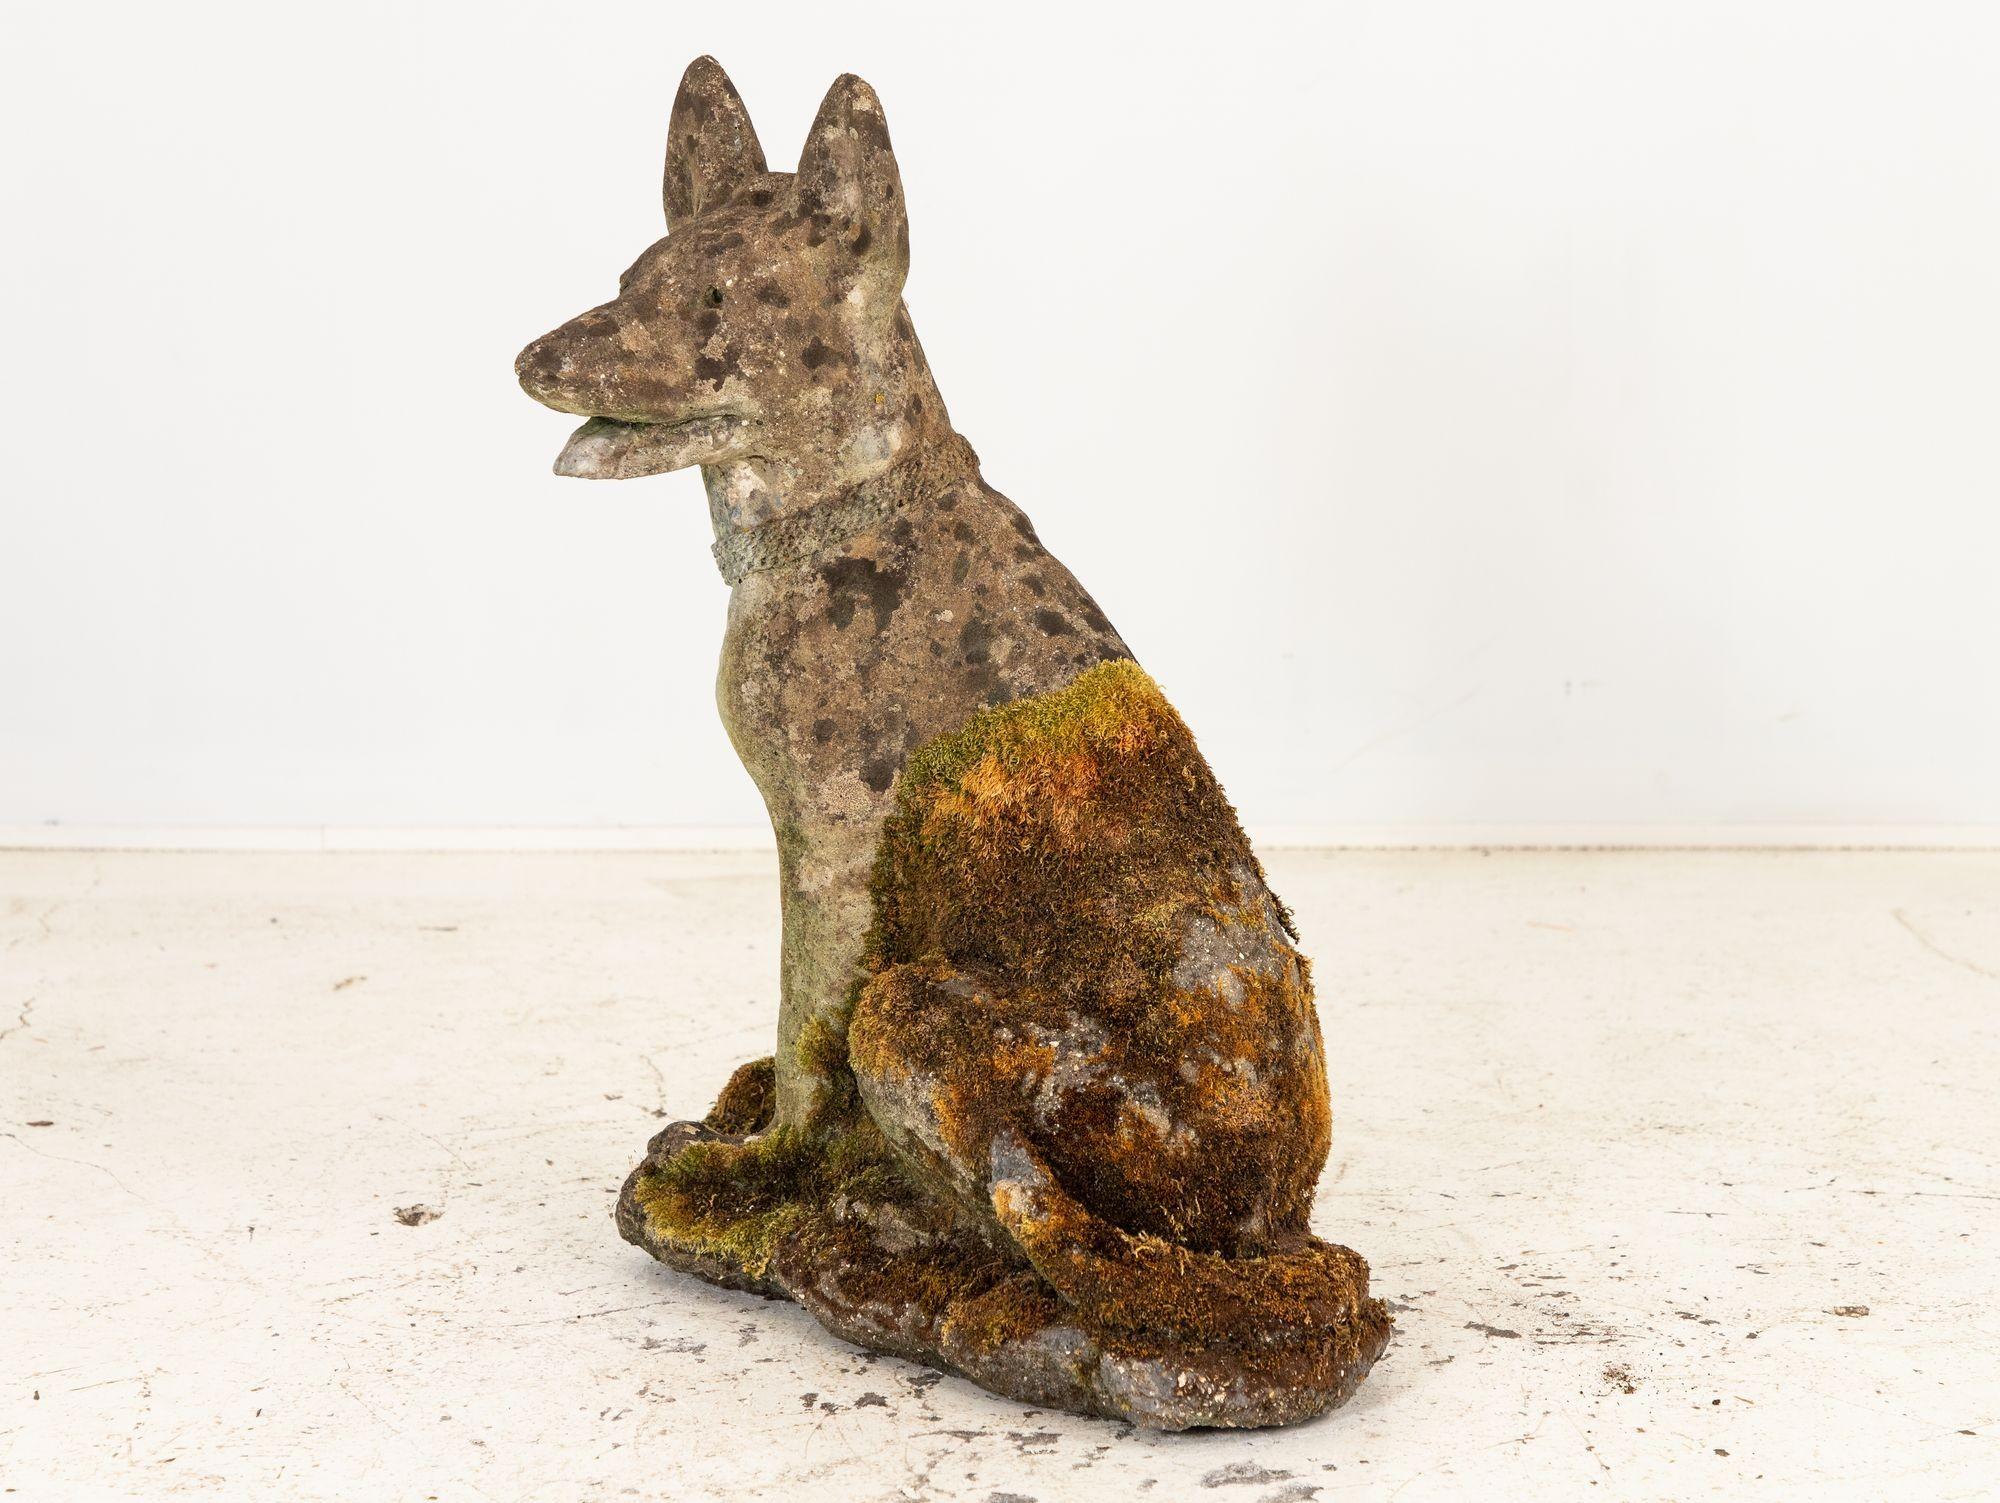 This exquisite mid-20th-century concrete Shepherd dog, covered in moss, exudes timeless elegance with an honest patina. Crafted in England, it takes the form of a small shepherd, its alert expressions beautifully captured with lifelike detail. The